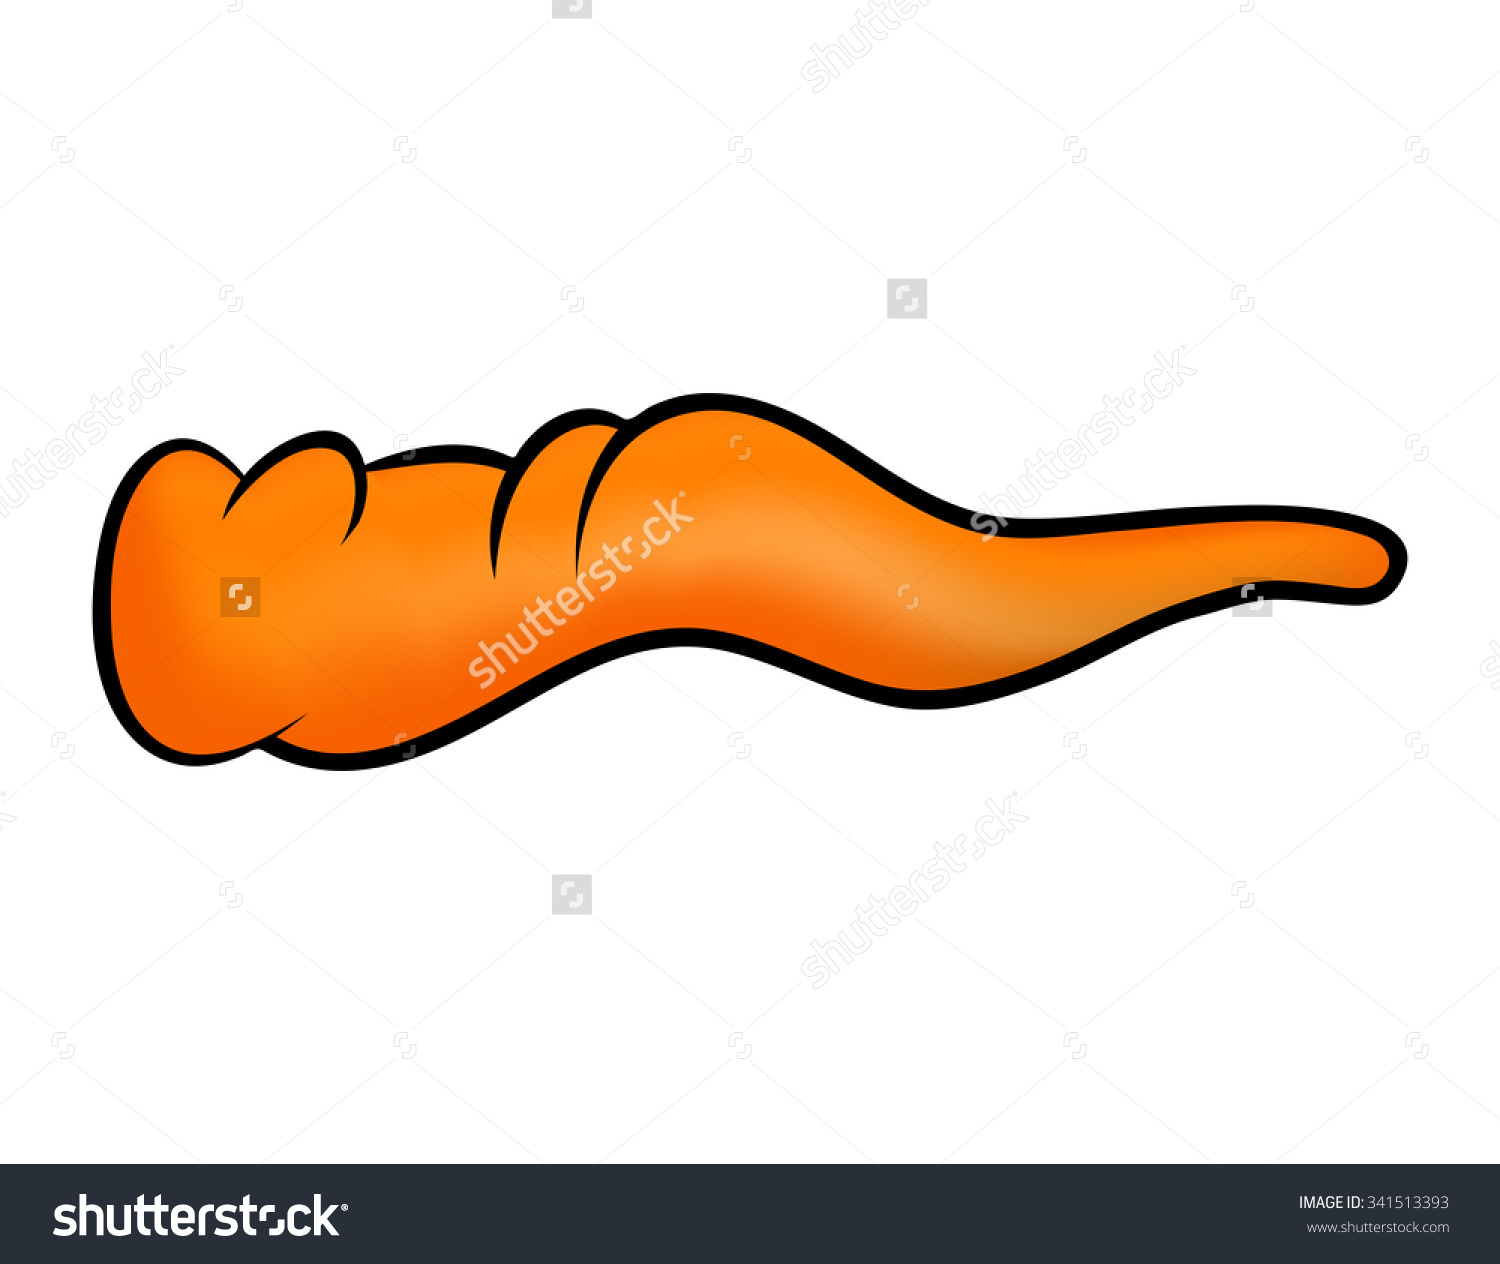 Crooked Cartoon Nose Carrot Nose Witch Stock Vector 341513393.